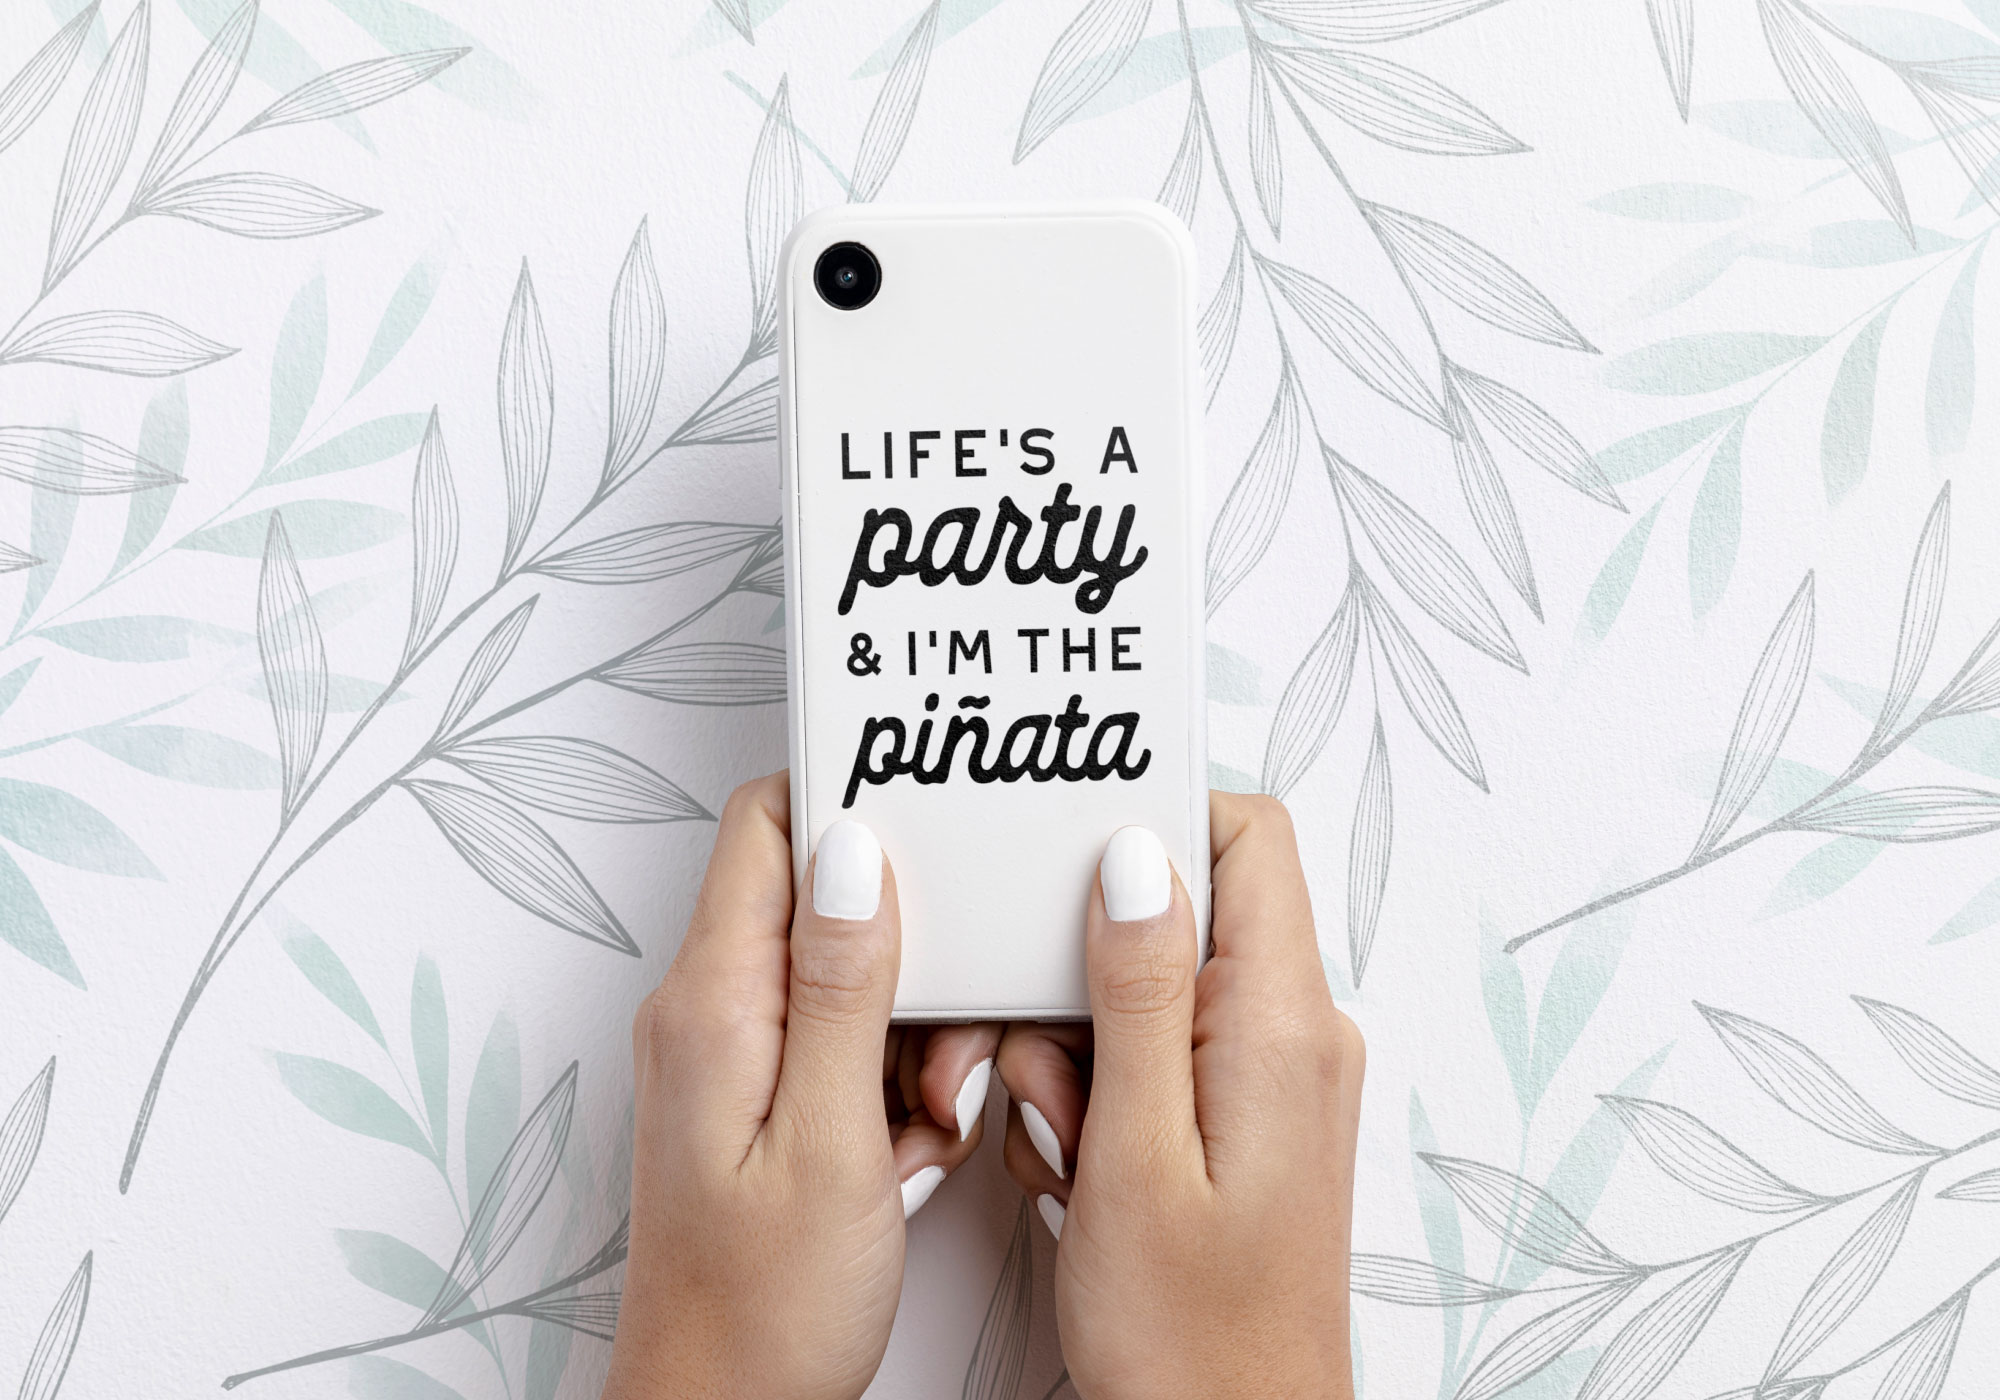 Free Life Is A Party SVG Cut File